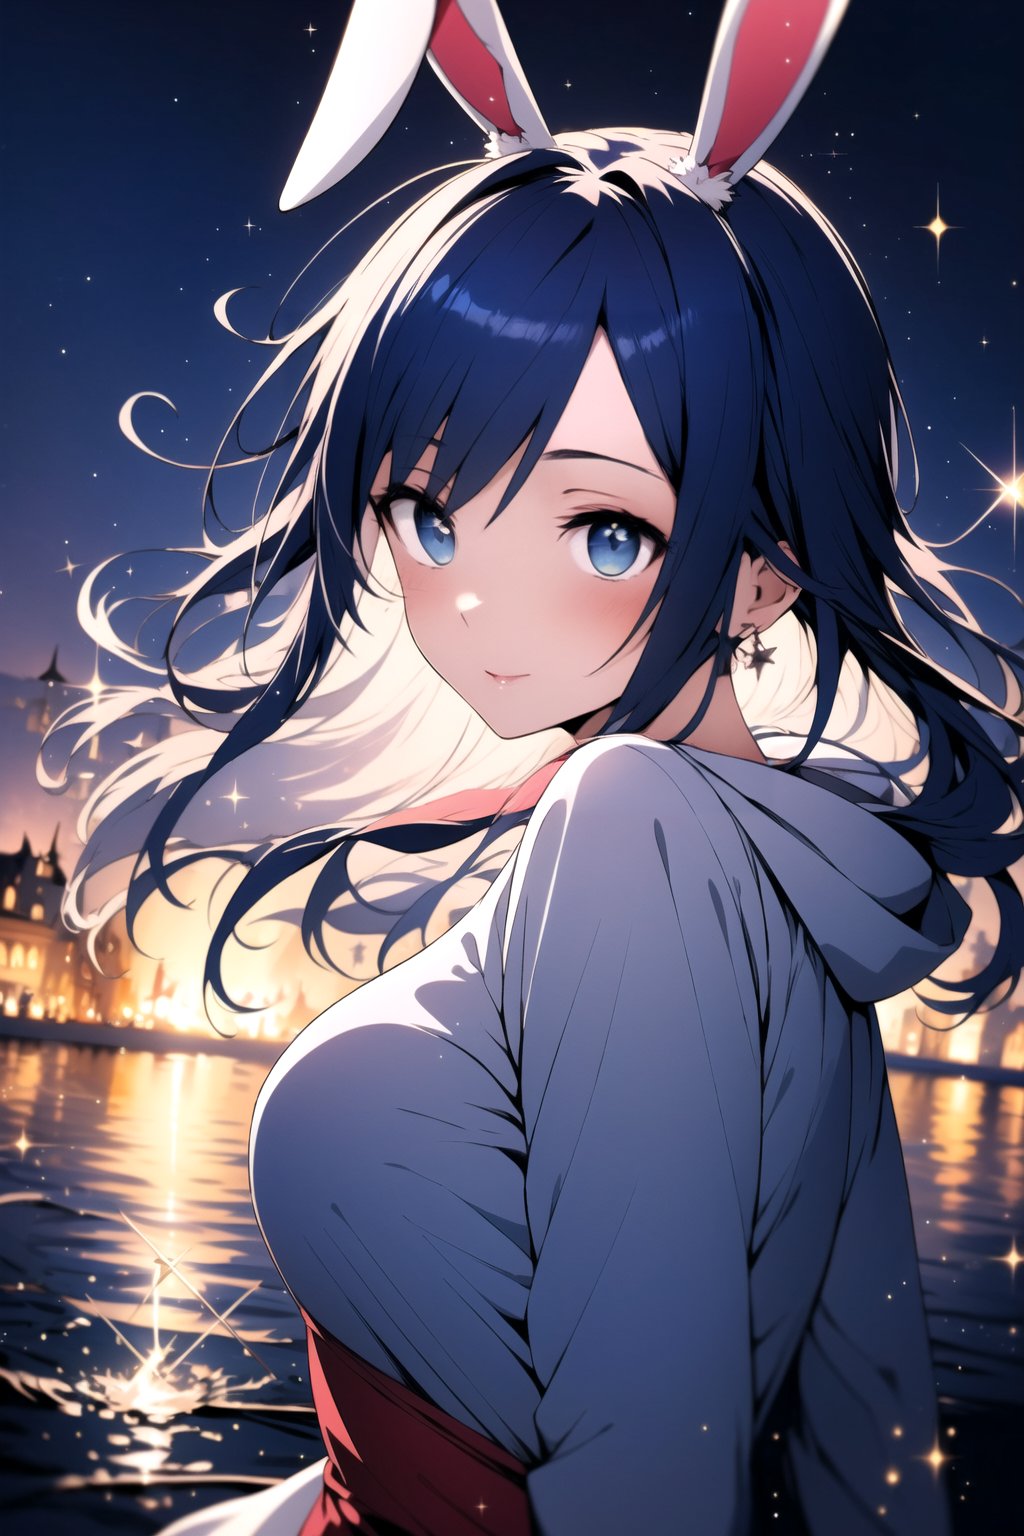 best quality, masterpiece, illustration, 1 girl, alone, dark blue sweatshirt, bunny ear, dark blue hair, sparkling eyes, floating_hair, cute outfit, High detailed , blushing, (two eyes different colors (sparkling one eye blue and eye the other red)), very_high_resolution,High detailed ,Color magic, sparkling daydream, facing_viewer, sparkling water, edgSDress, magical sceptre, dazzling magic effect, perfect eyes